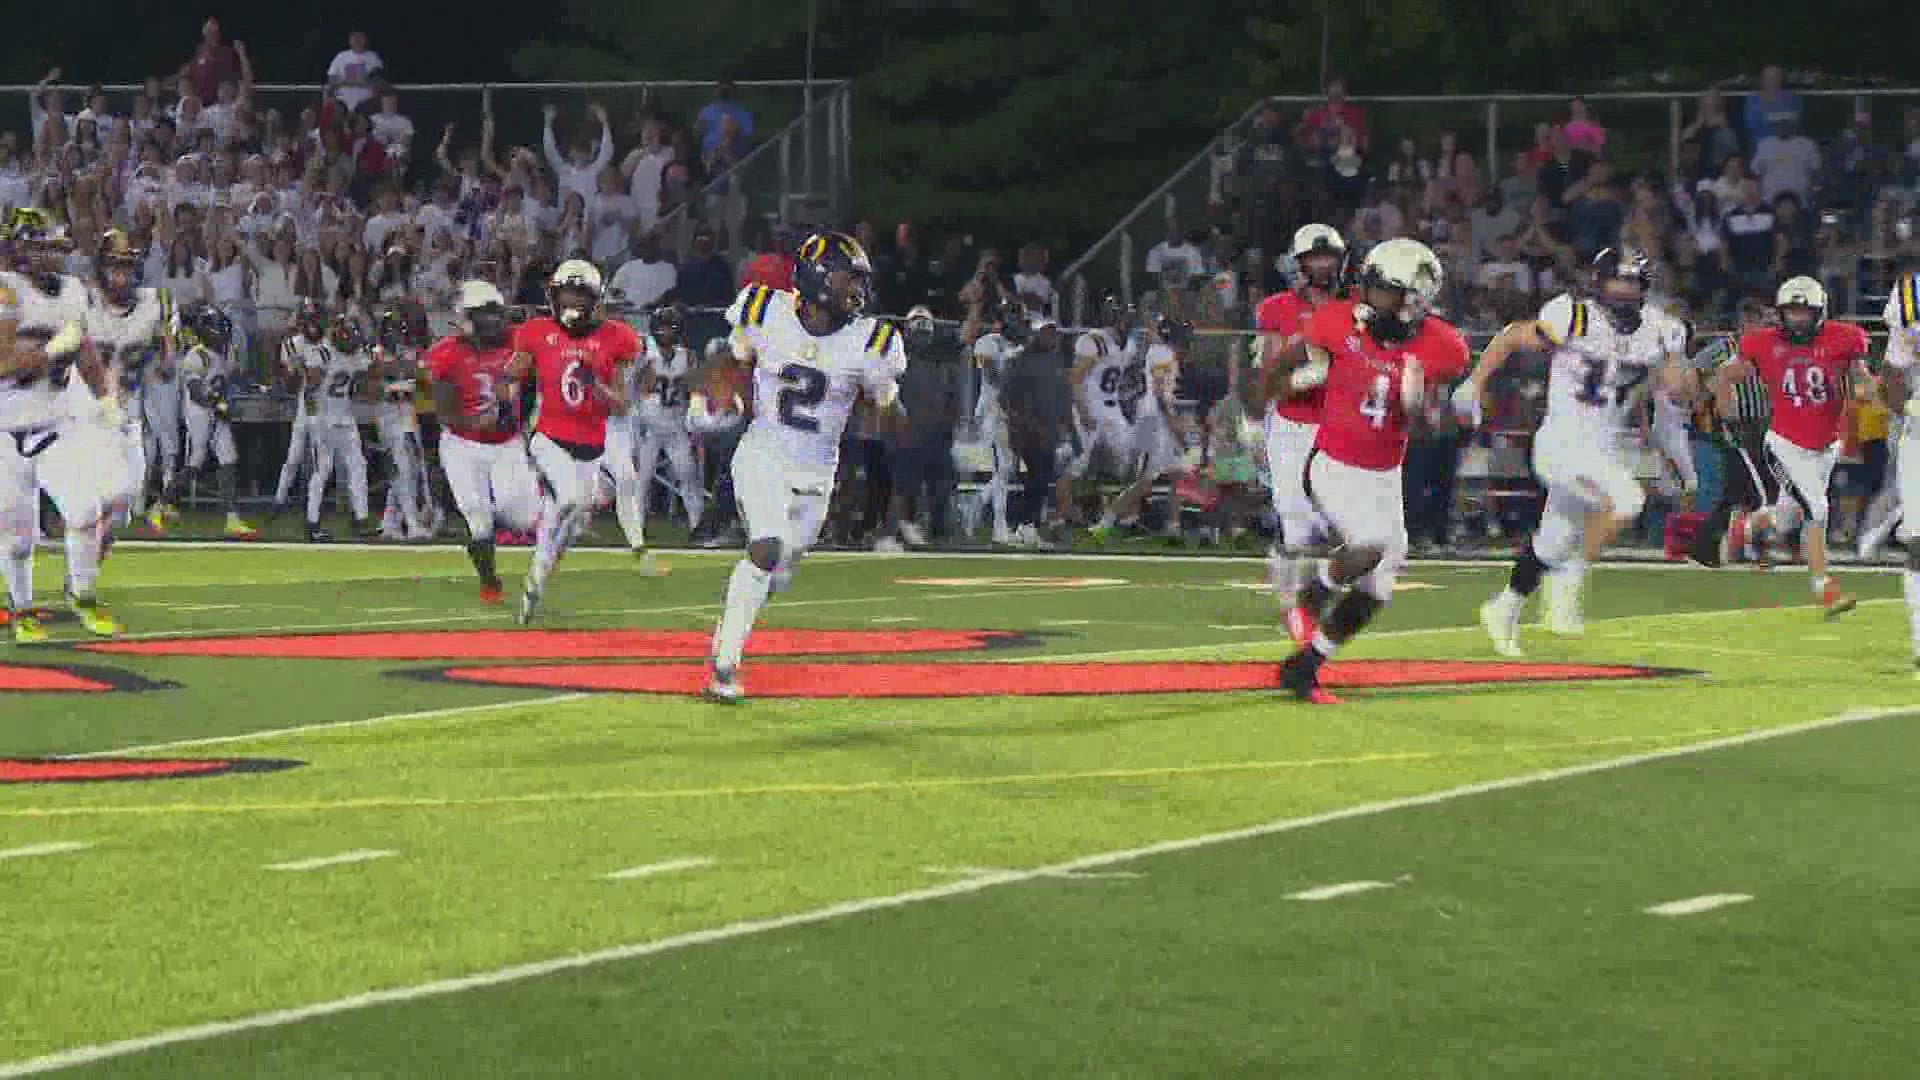 Highlights from around the area on high school football Friday night in St. Louis.